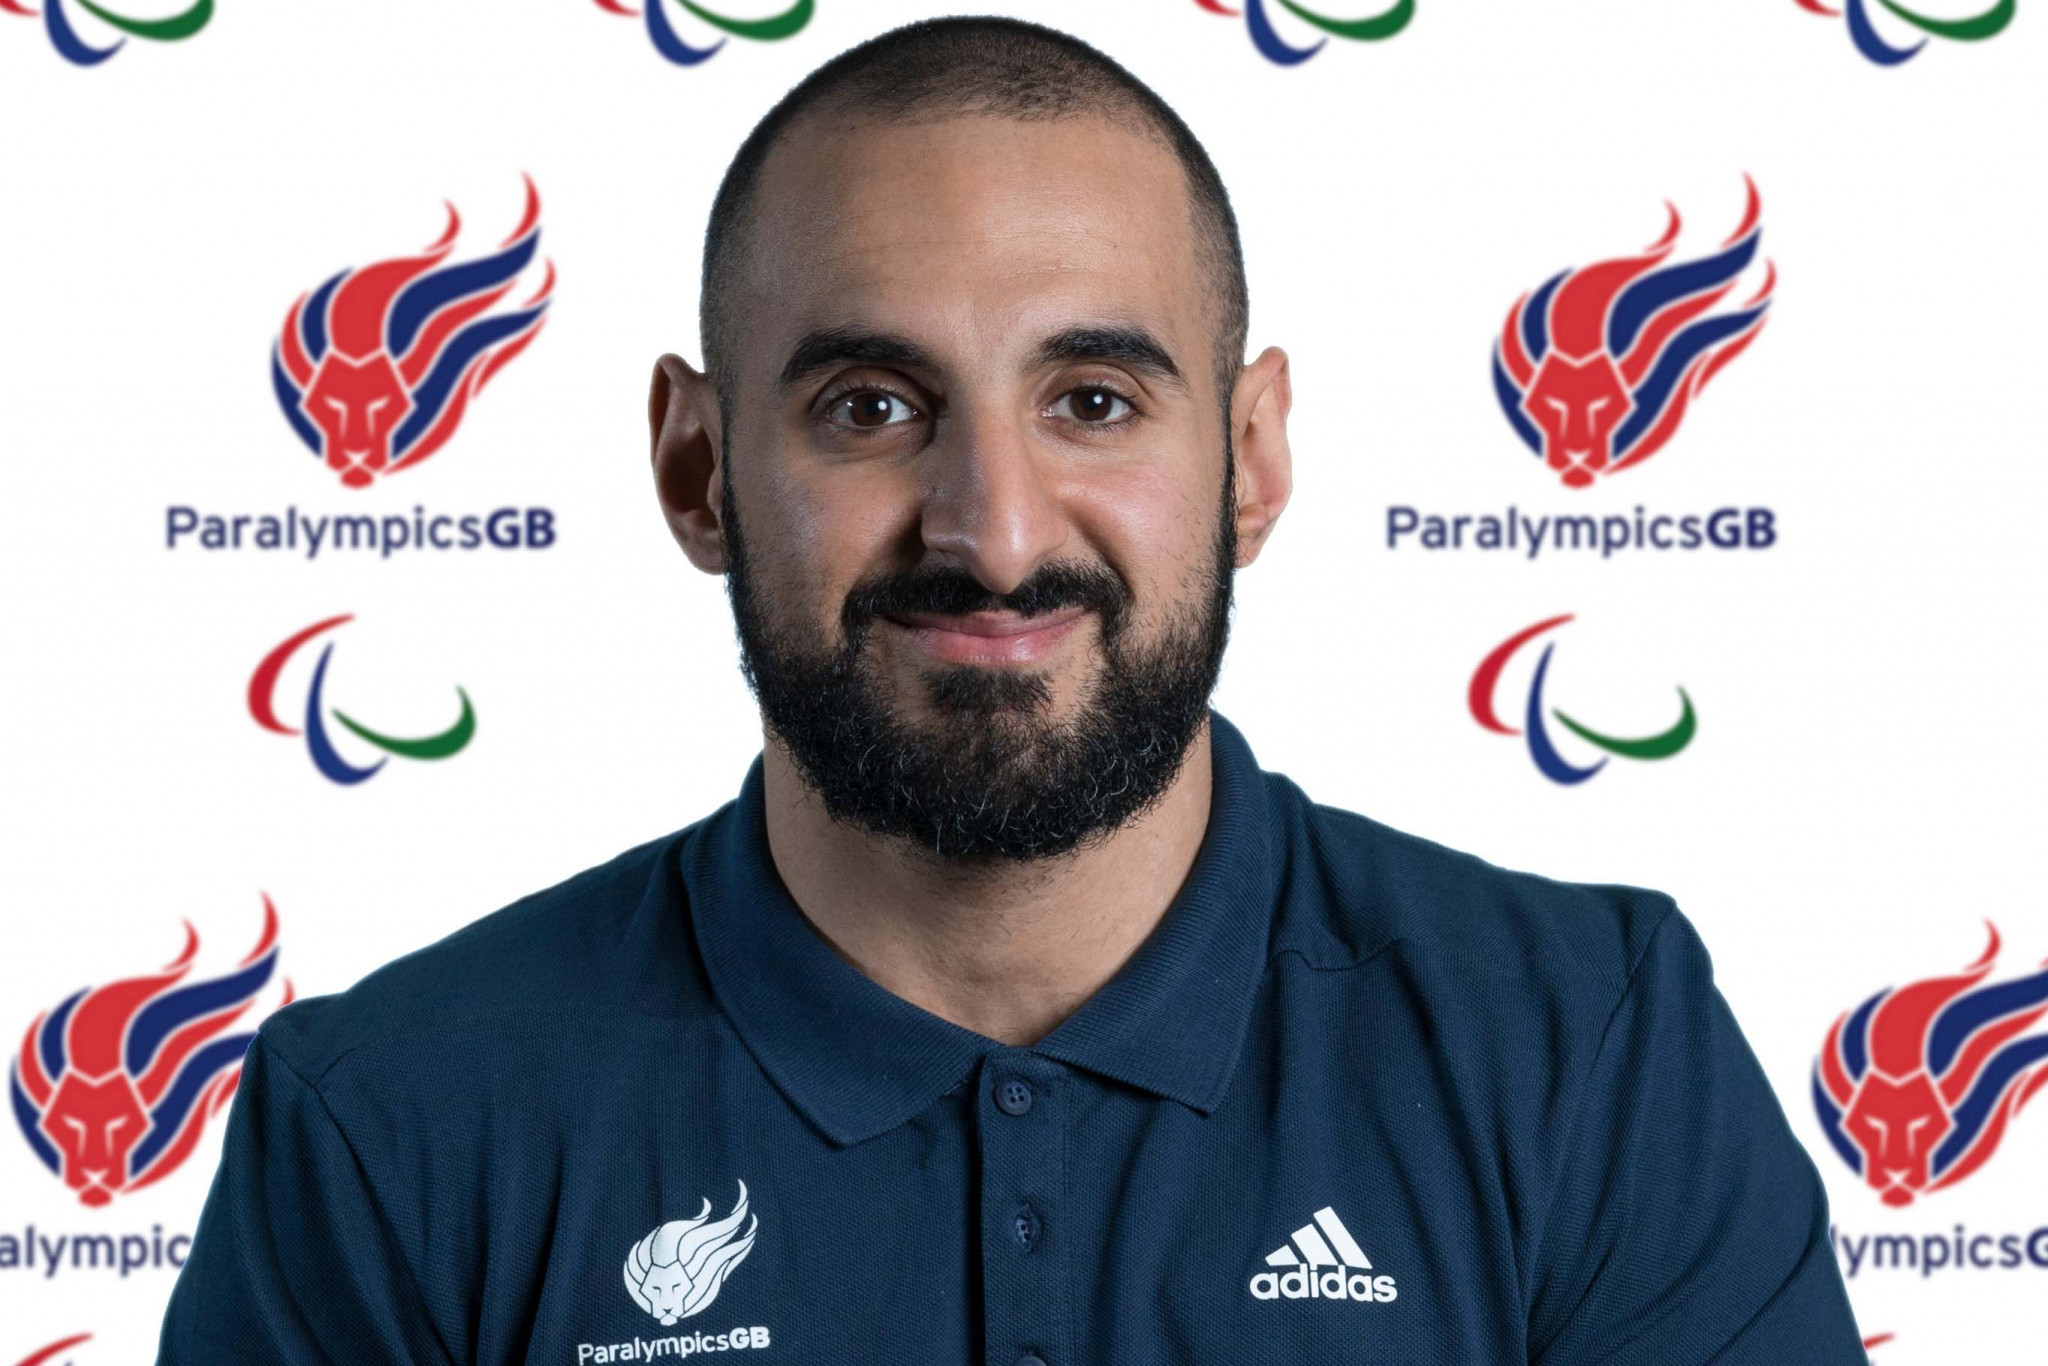 British powerlifter urges IPC for more transparency over health measures ahead of Tokyo 2020